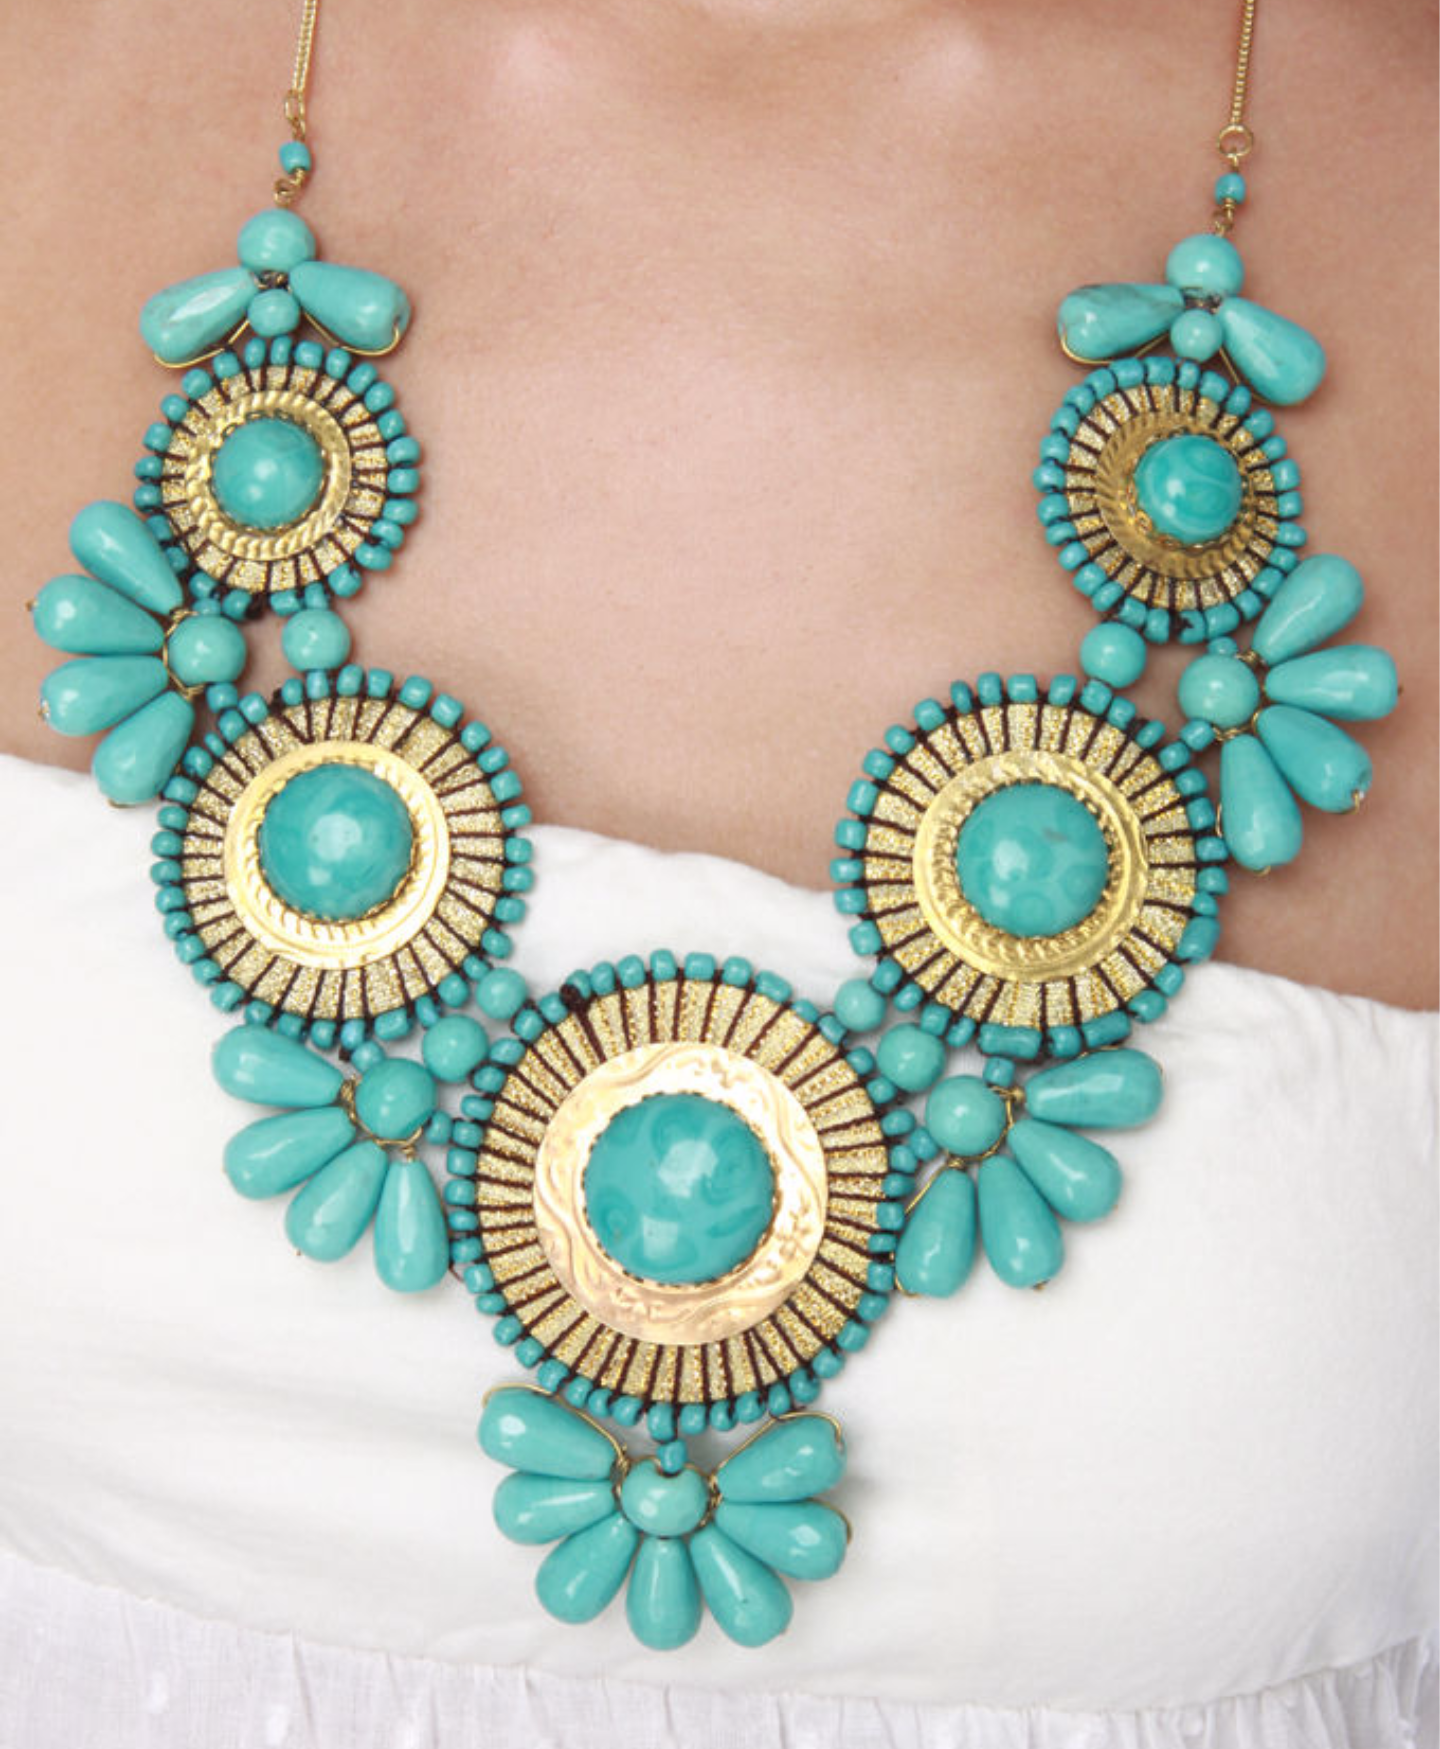 2028 Jewelry Turquoise And Aqua Faceted Stone Bib Necklace 16